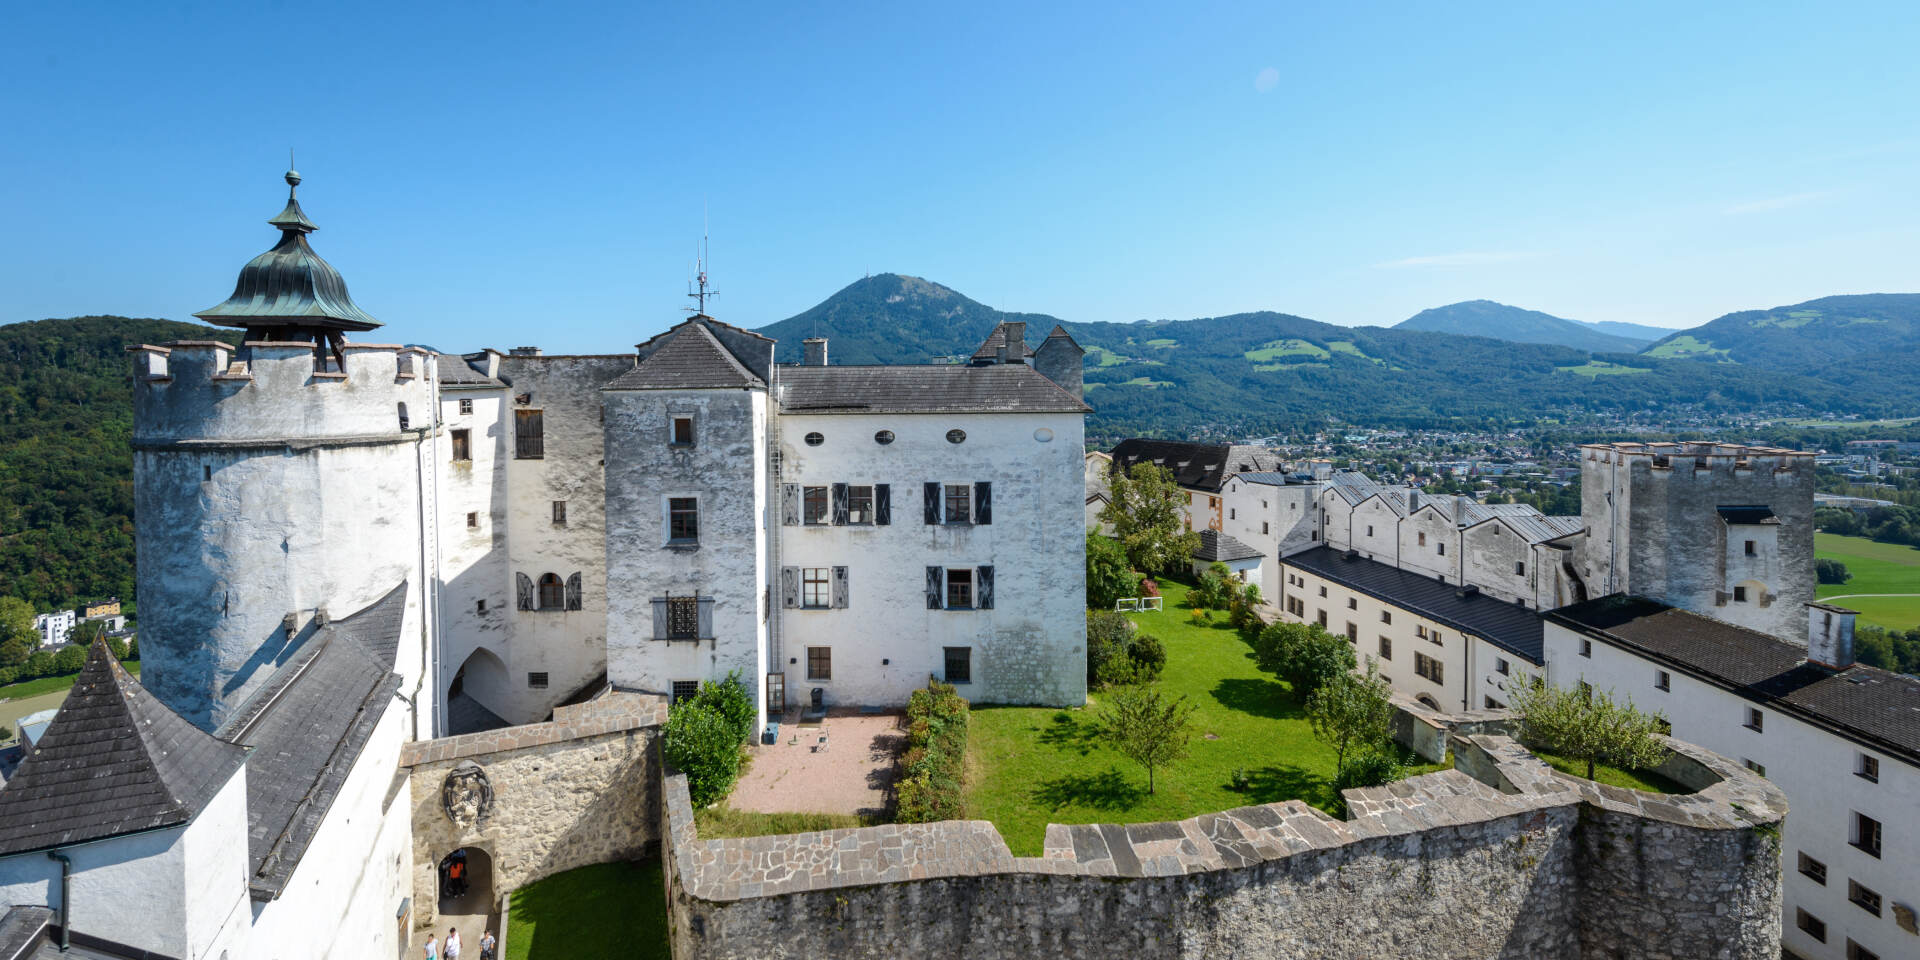 View from the tower of Fortress Hohensalzburg © Tourismus Salzburg GmbH